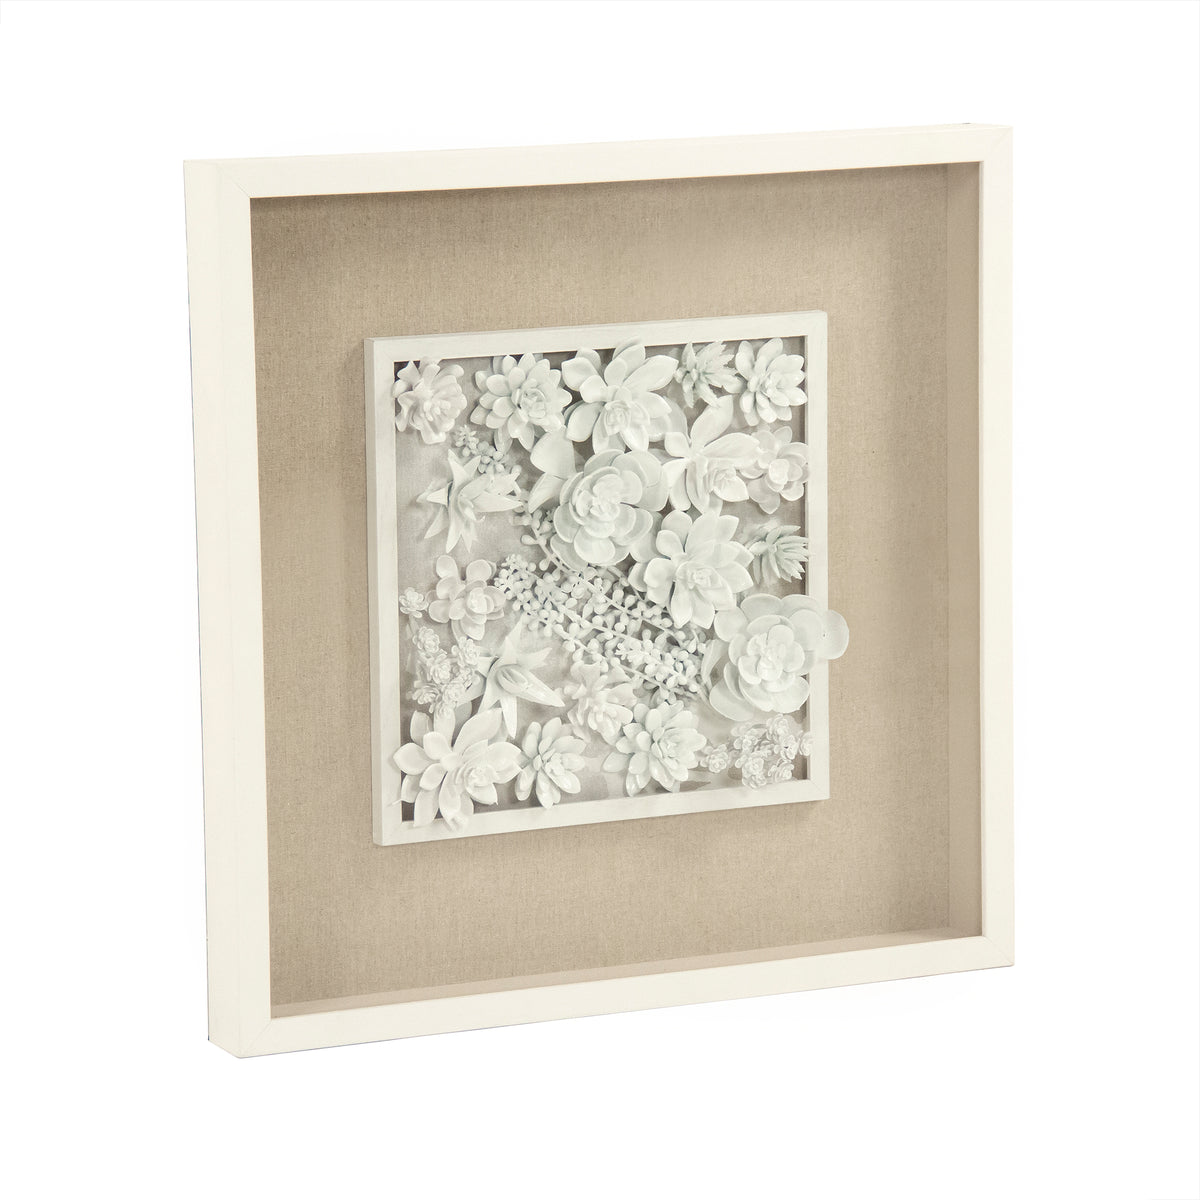 Abstract Ceramic Botanical Wall Art by Zentique